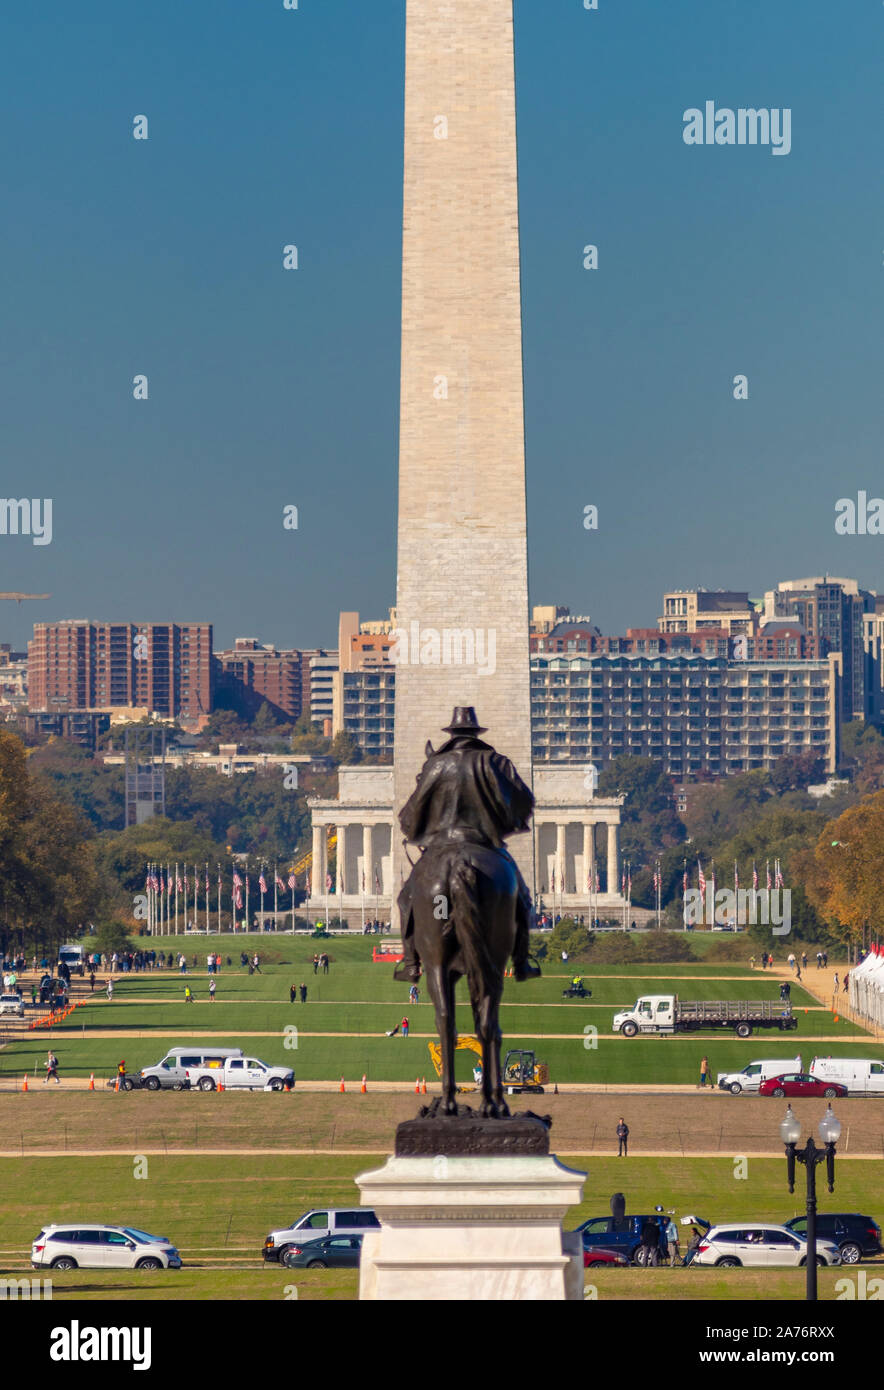 WASHINGTON, DC, USA - The National Mall. Washington Monument in distance. Ulysses S. Grant statue, foreground. Stock Photo